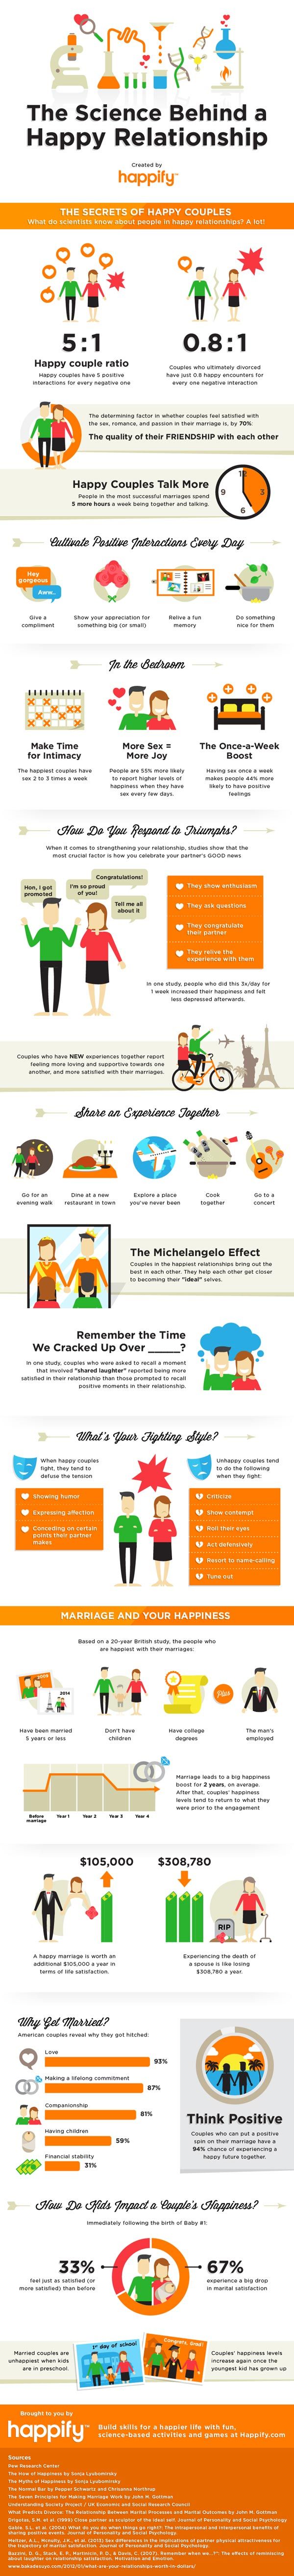 Infographic about happy relationship tips